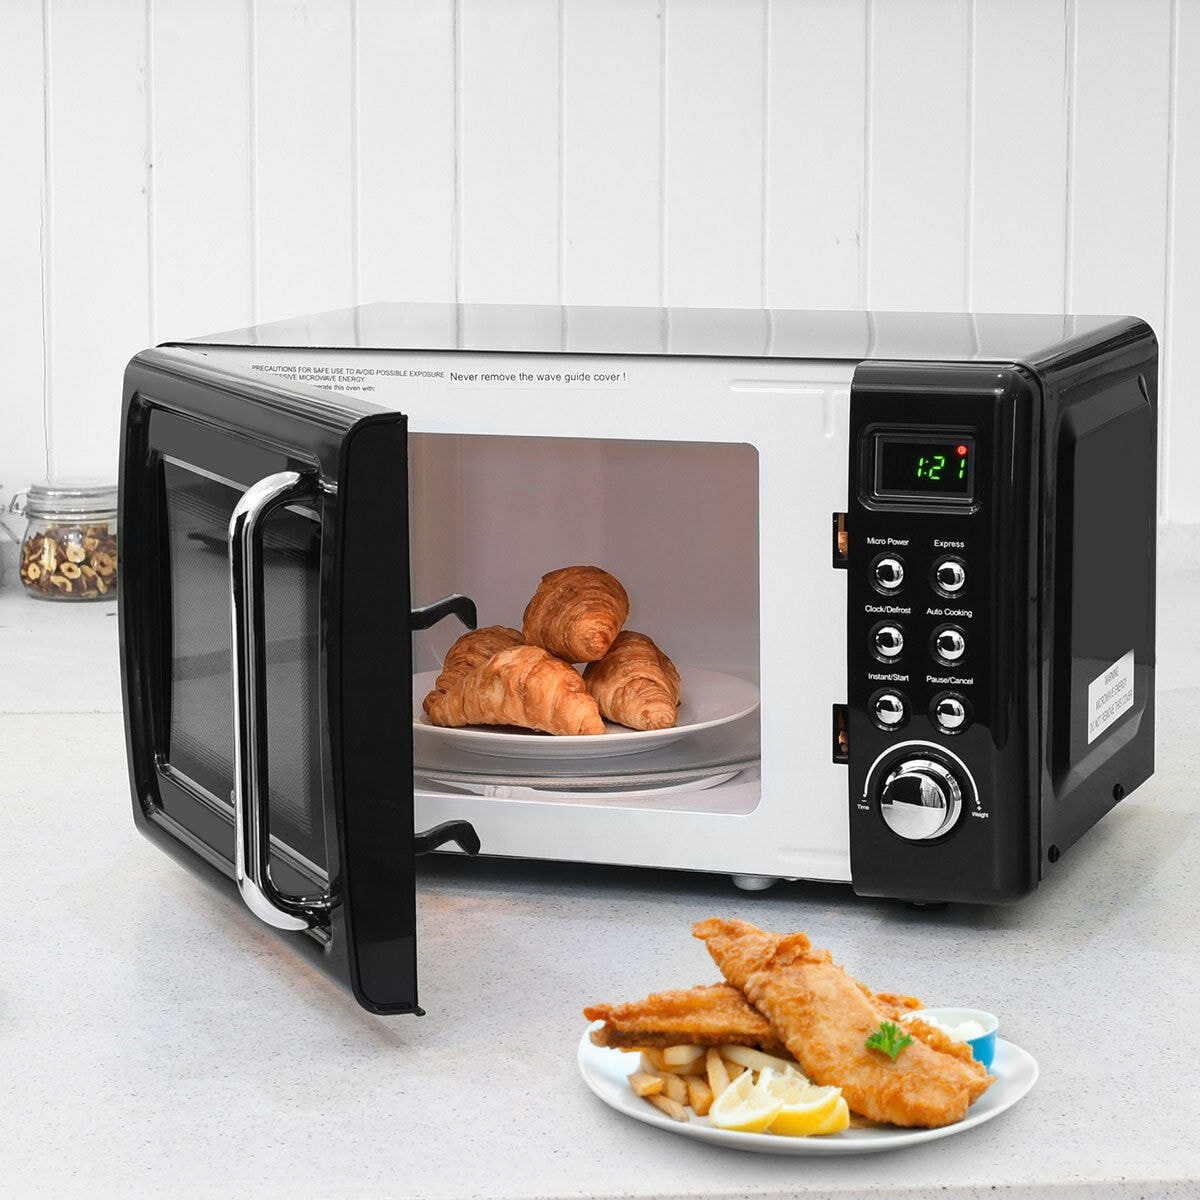 https://ak1.ostkcdn.com/images/products/is/images/direct/ac15bd655beead47ae5926ed77b704e029b34ddb/Costway-0.7Cu.ft-Retro-Countertop-Microwave-Oven-700W-LED-Display-Glass-Turntable-BlackWhite.jpg